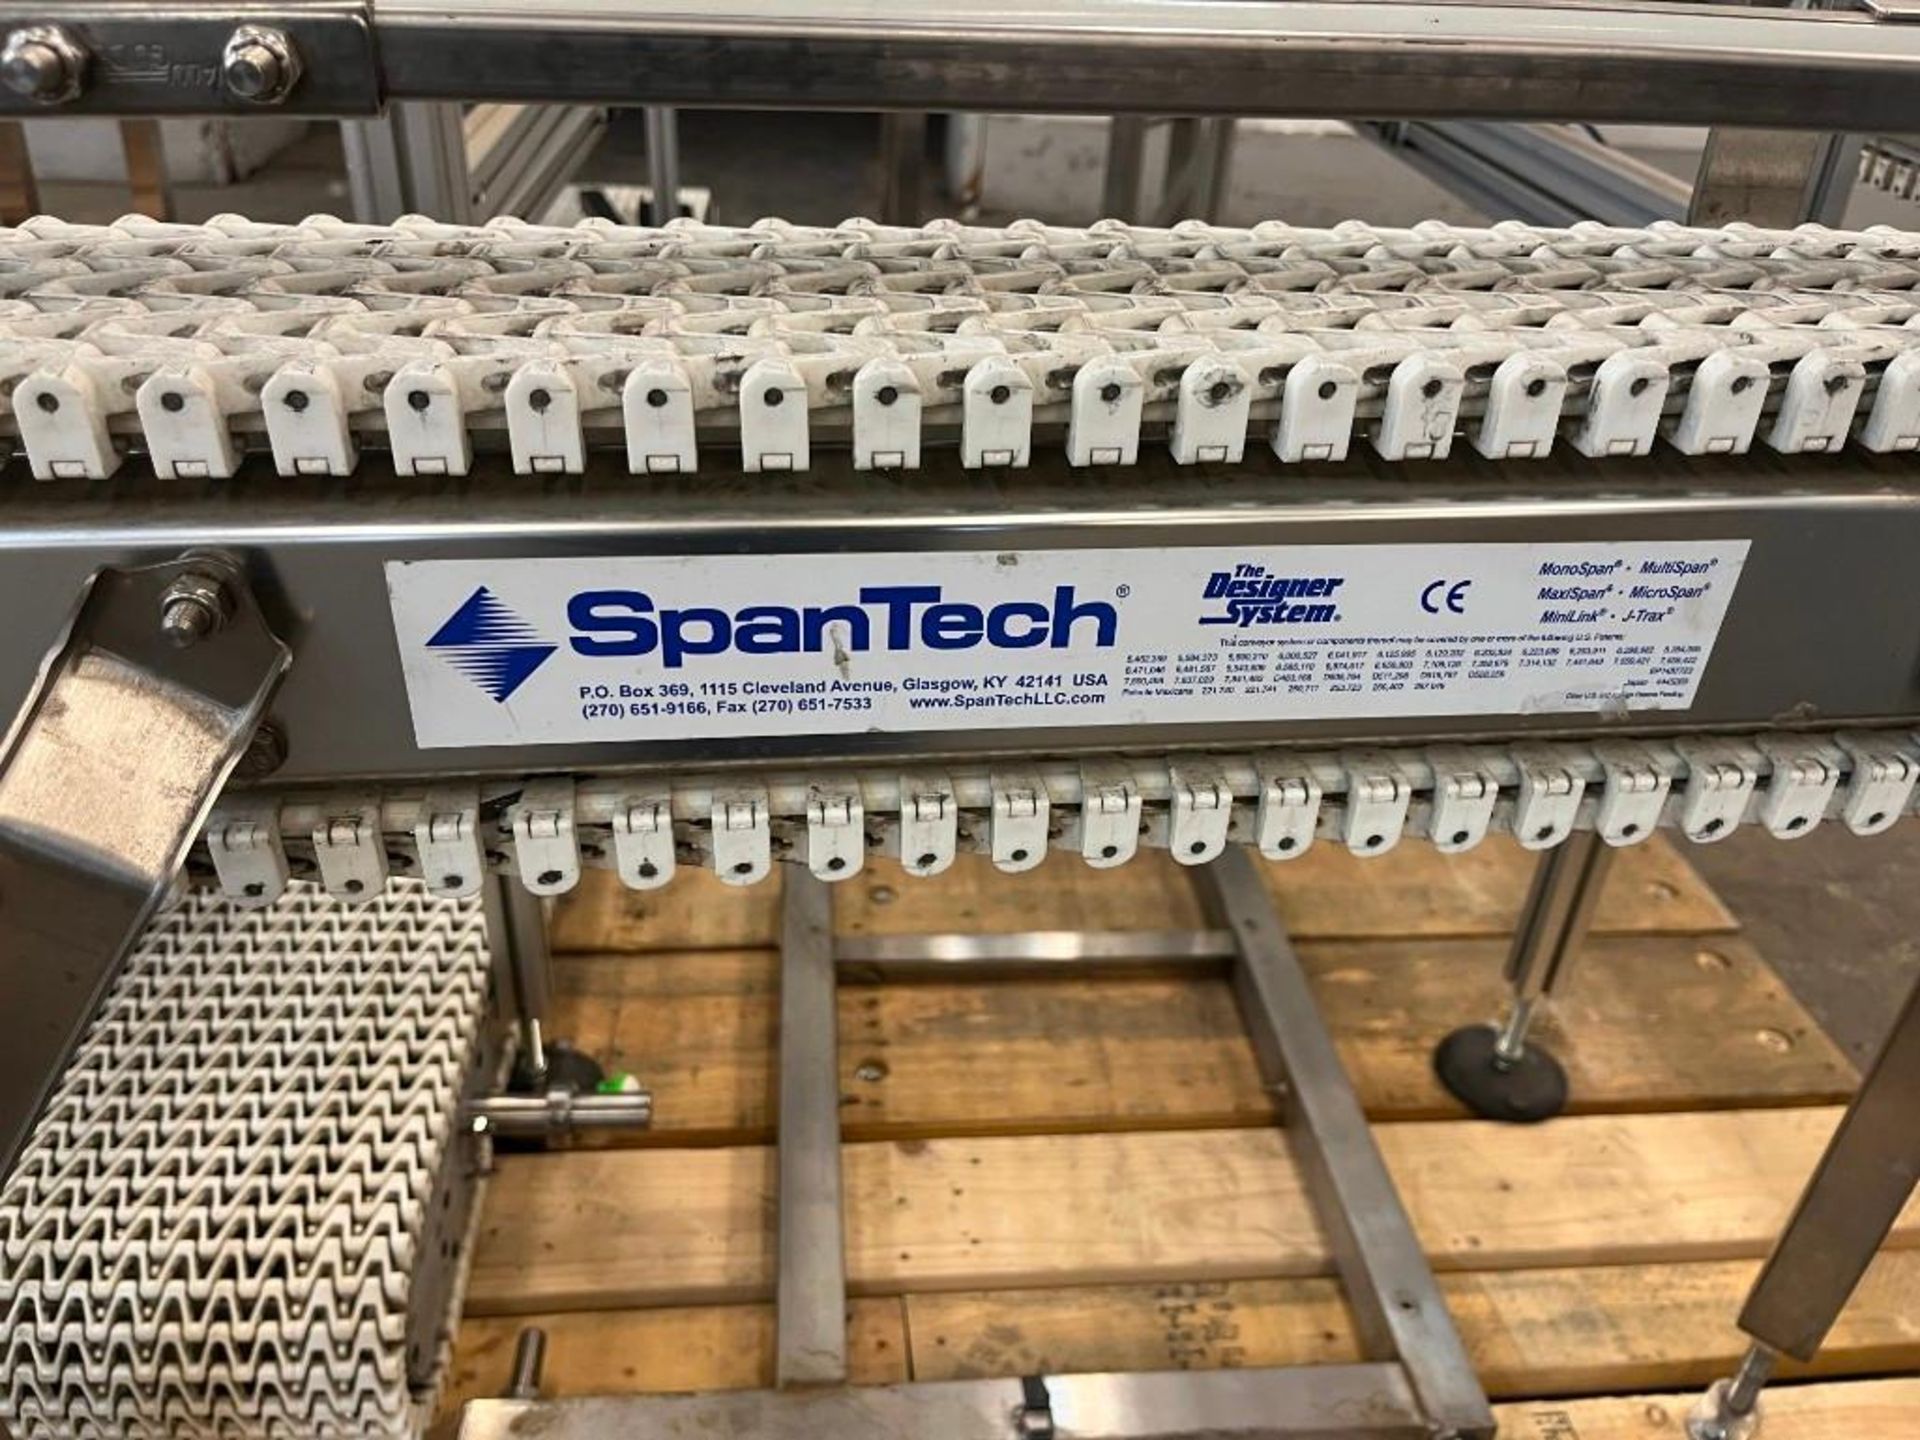 Spantech Flexlink Conveyor System and Linear Accumulation Table, S/N: 2254000325. Stainless steel co - Image 16 of 21